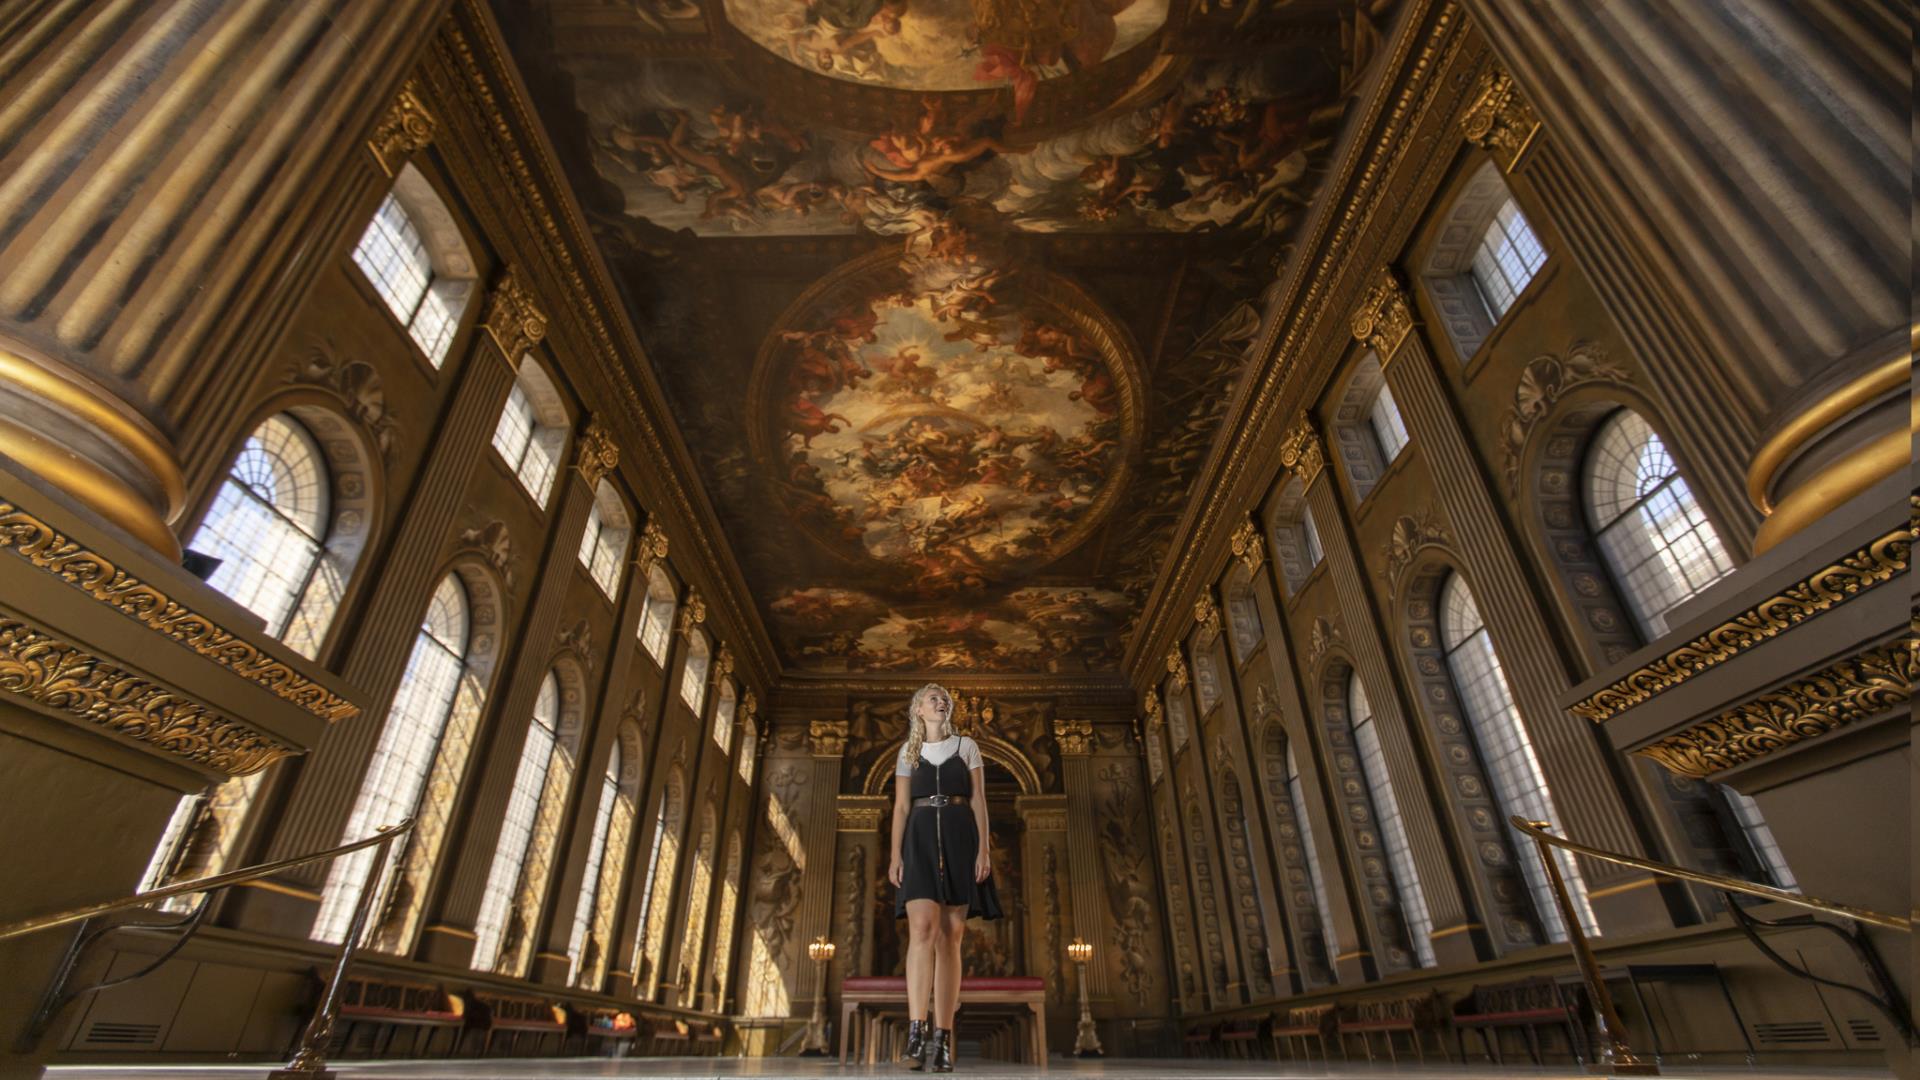 A girl marvels at the ceiling at the Painted Hall at the Old Royal Naval College in Greenwich.